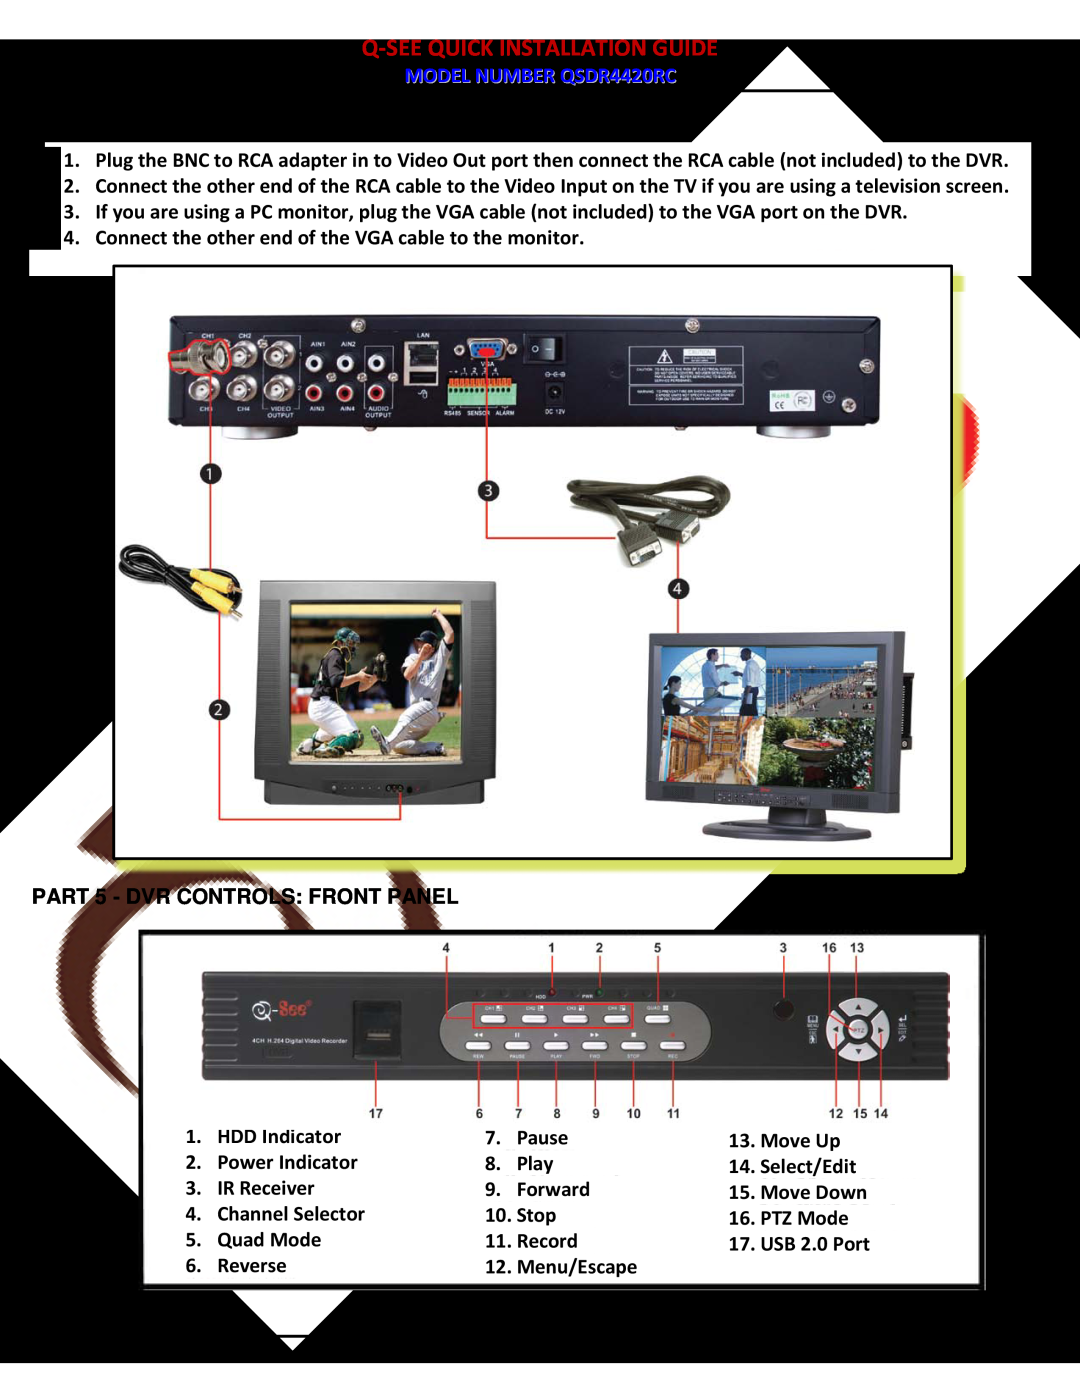 Q-See QSDR4420RC PART 4 - CONNECTING THE DVR TO YOUR TV, PART 5 - DVR CONTROLS FRONT PANEL, Q-See Quick Installation Guide 